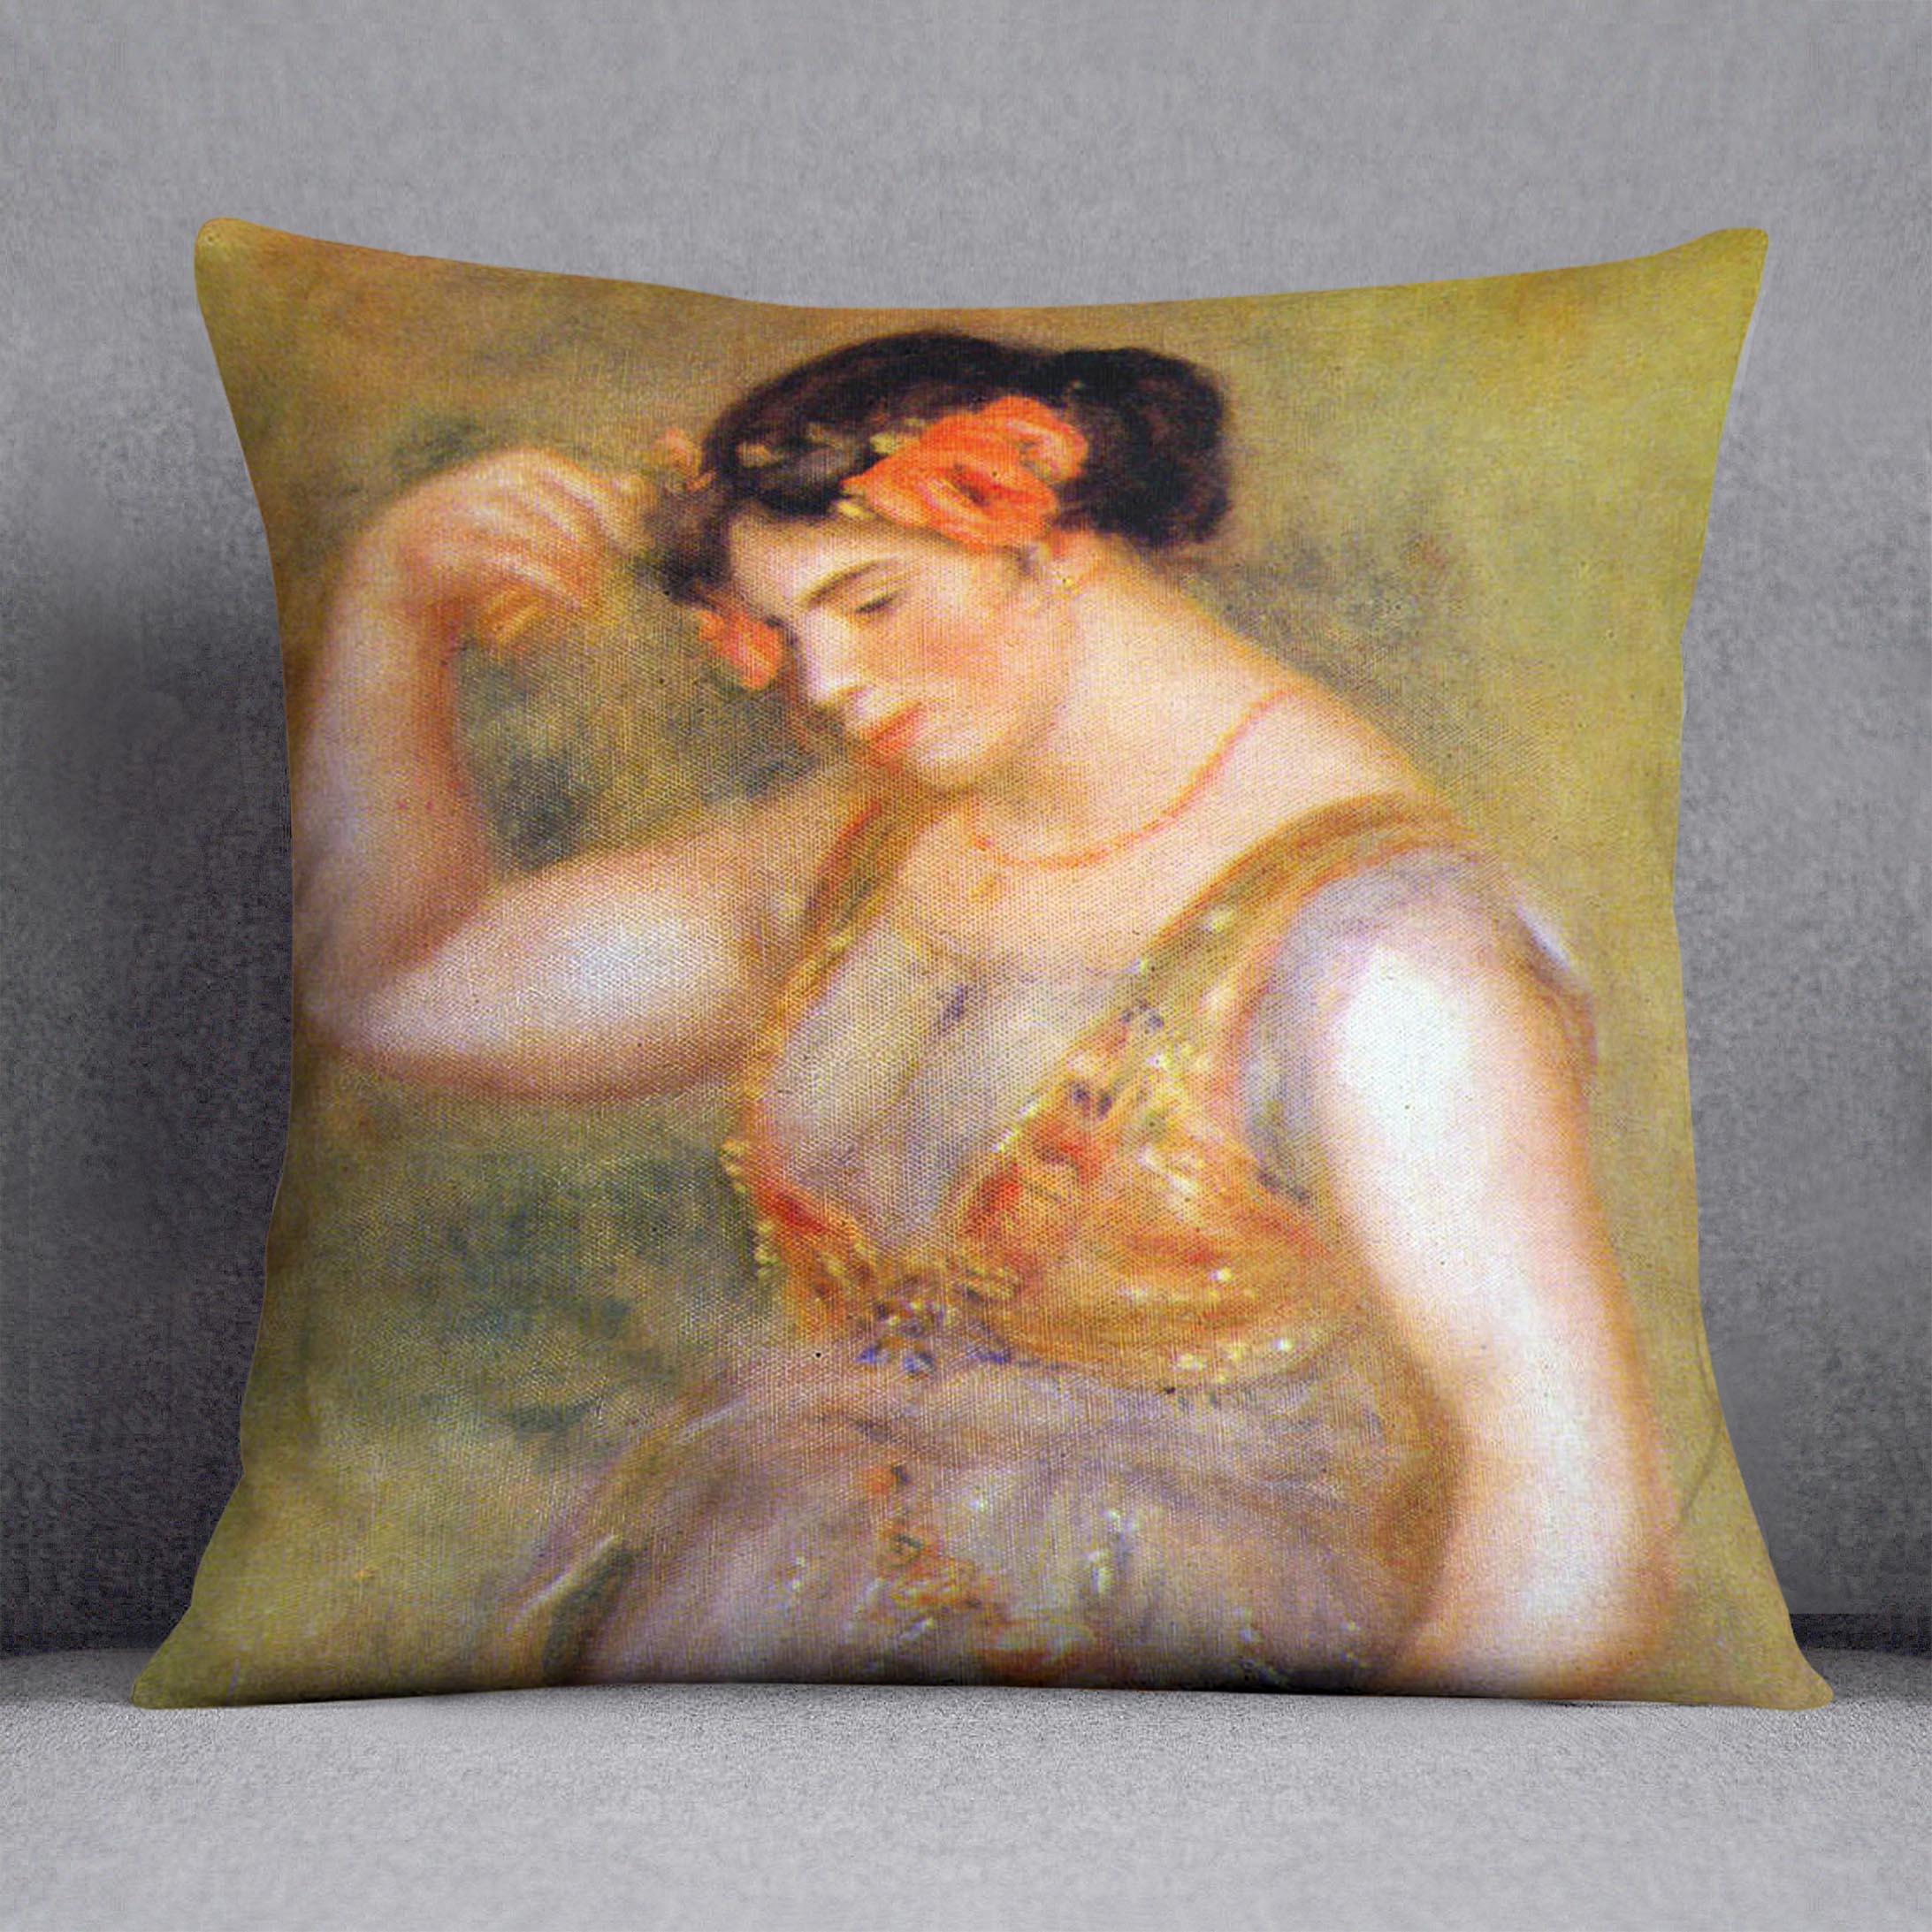 Dancer with castanets by Renoir Cushion